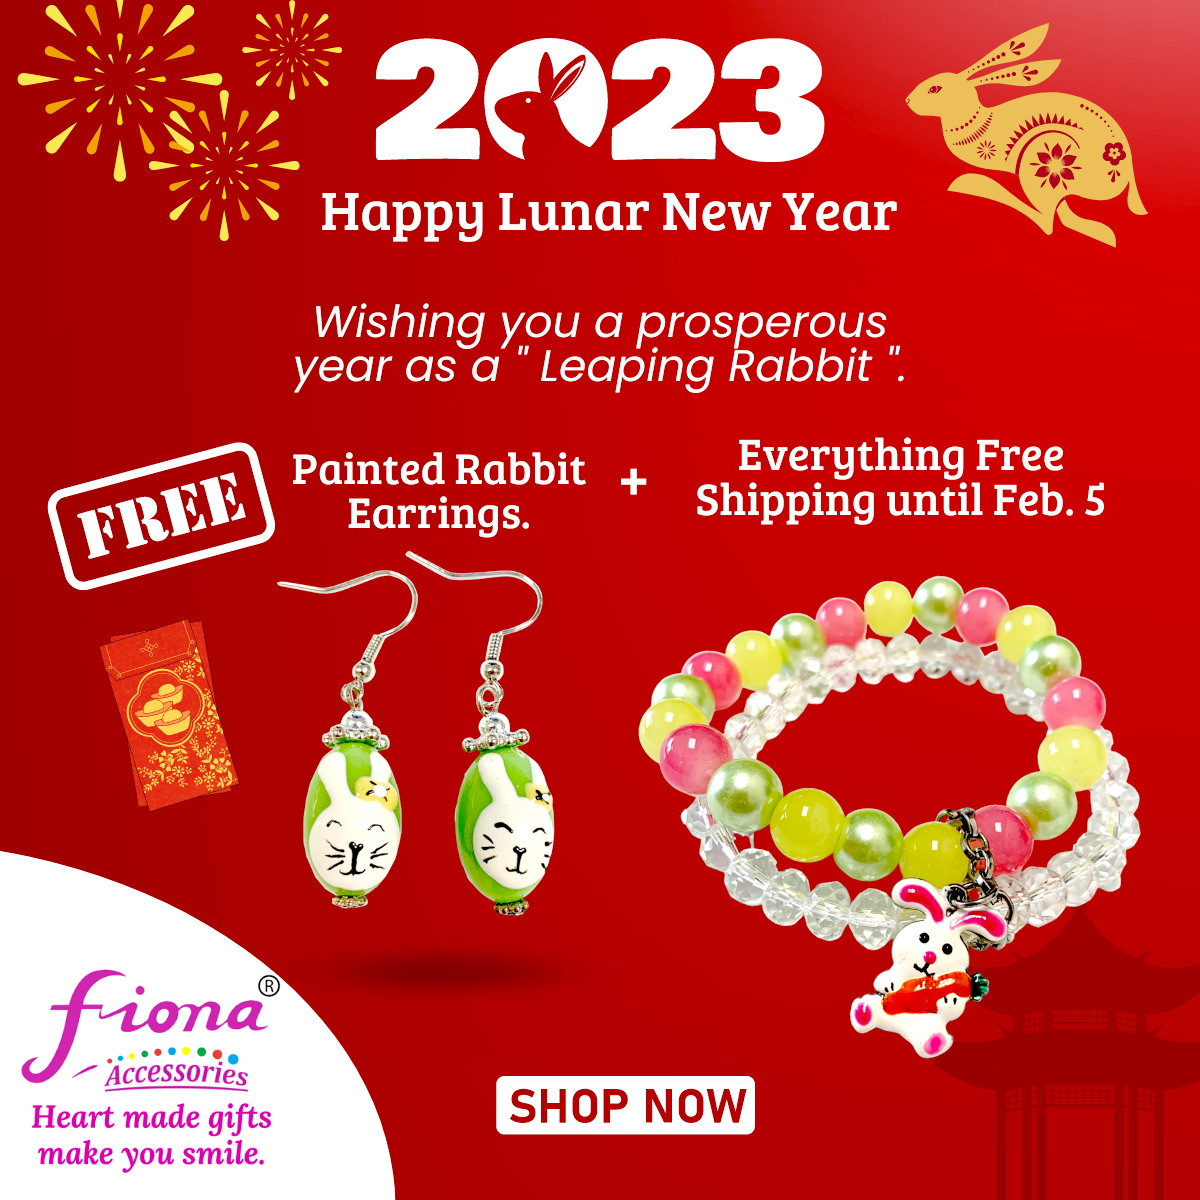 Fionaaccessories.com Happy Lunar New Year Free Shipping + Free Rabbit Earrings until Feb. 5, 2023.